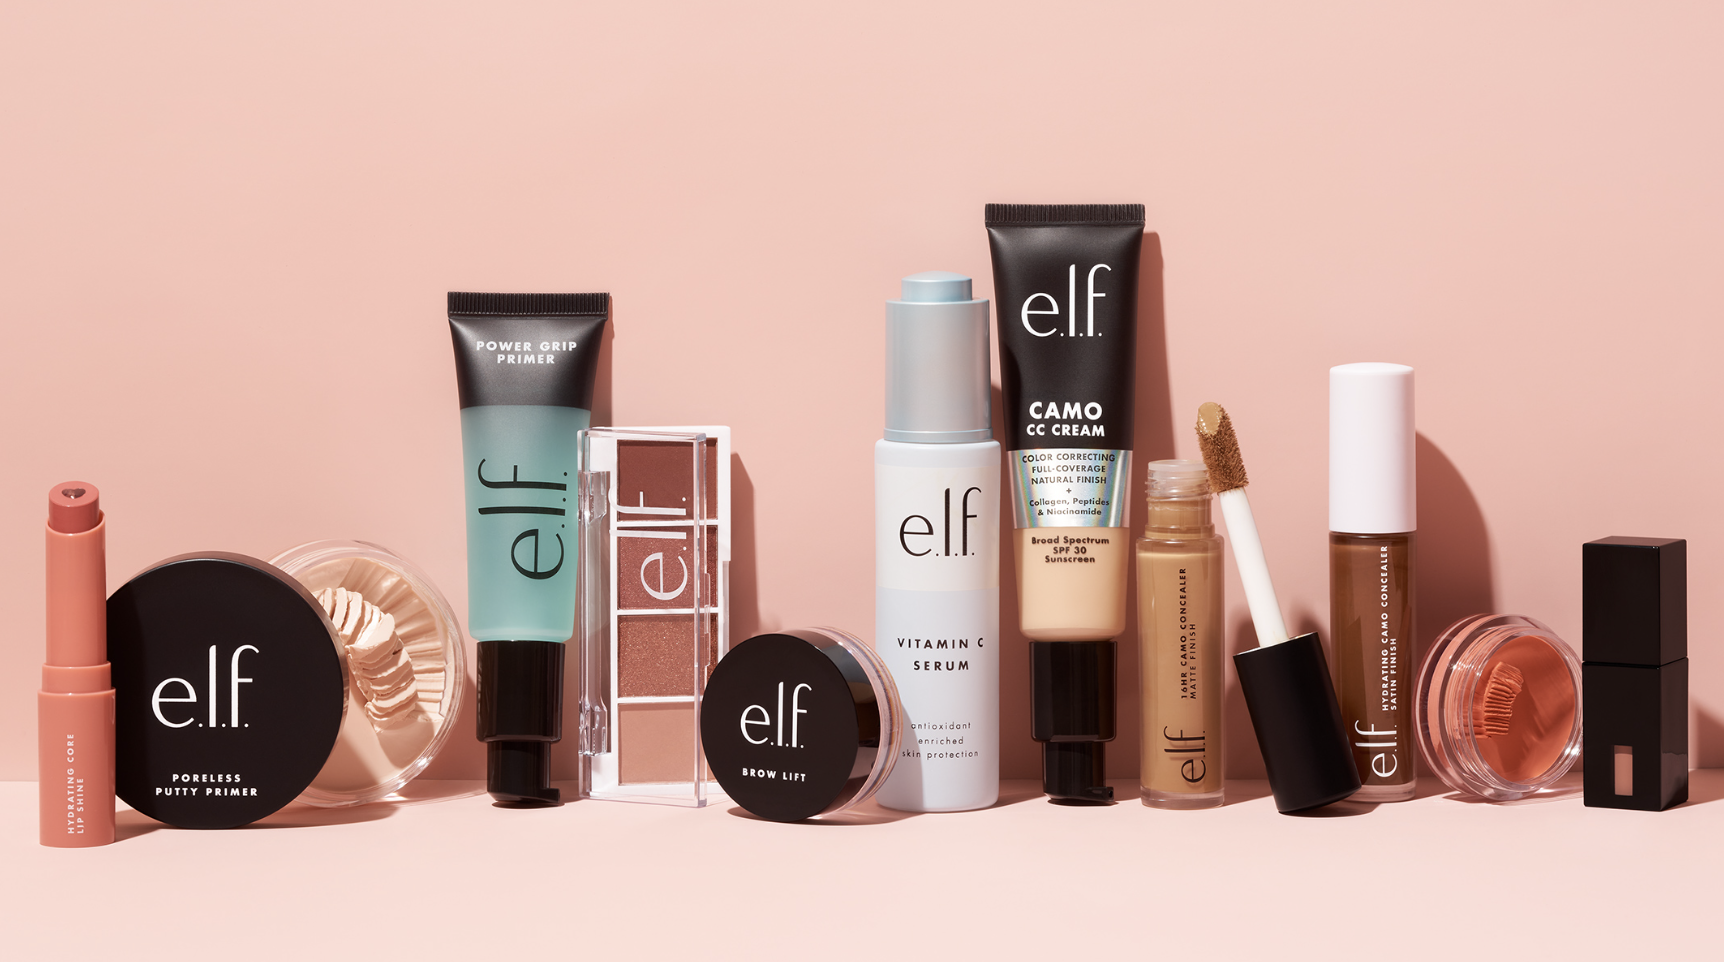 E.l.f. Cosmetics Steps Up in Italy With Physical Rollout at Douglas